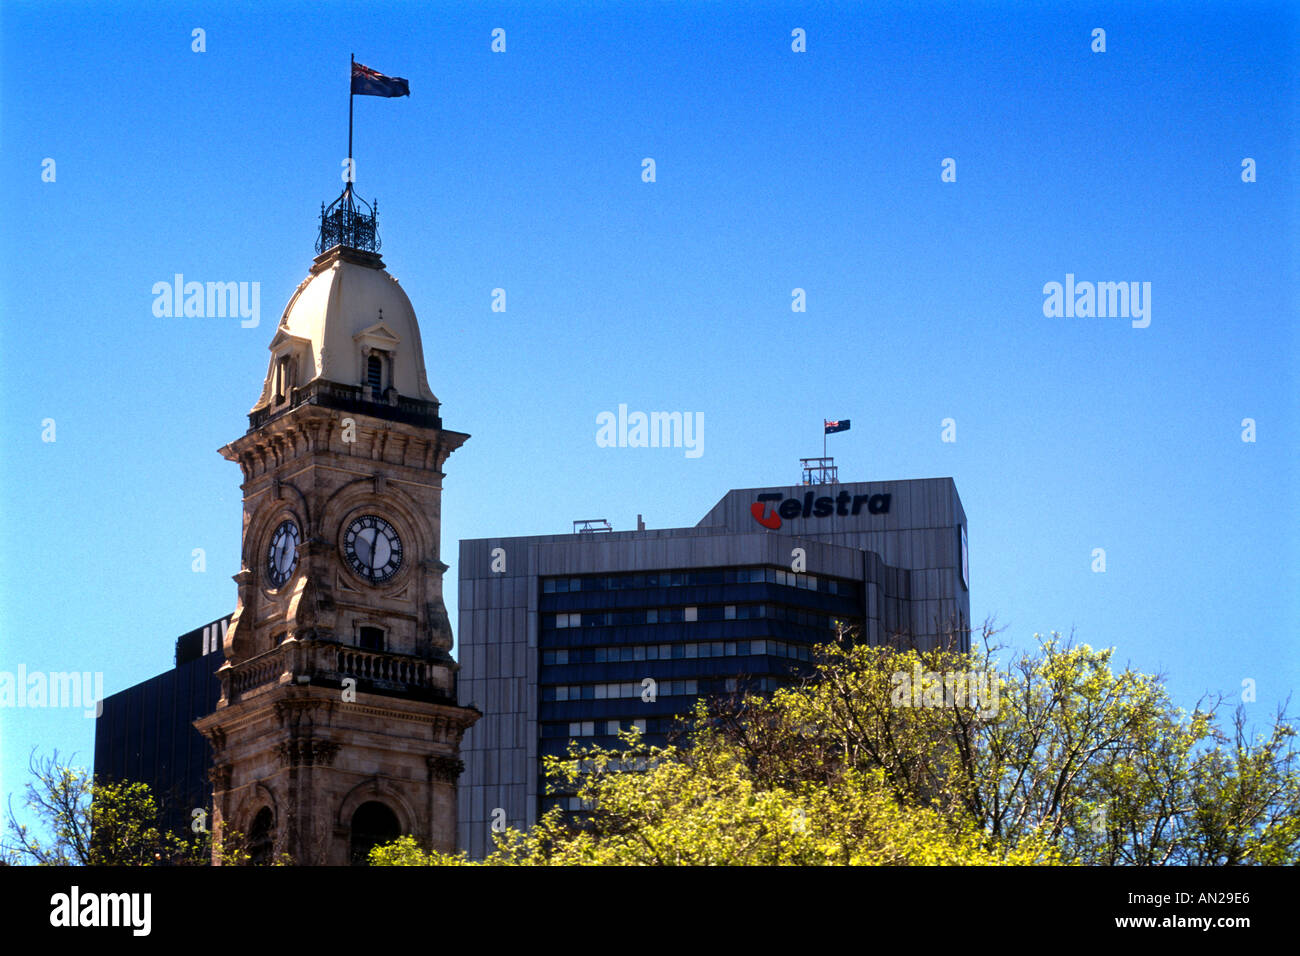 October 1996 Adelaide South Australia Australia City skyline with the gothic tower of the Victorian post office Stock Photo